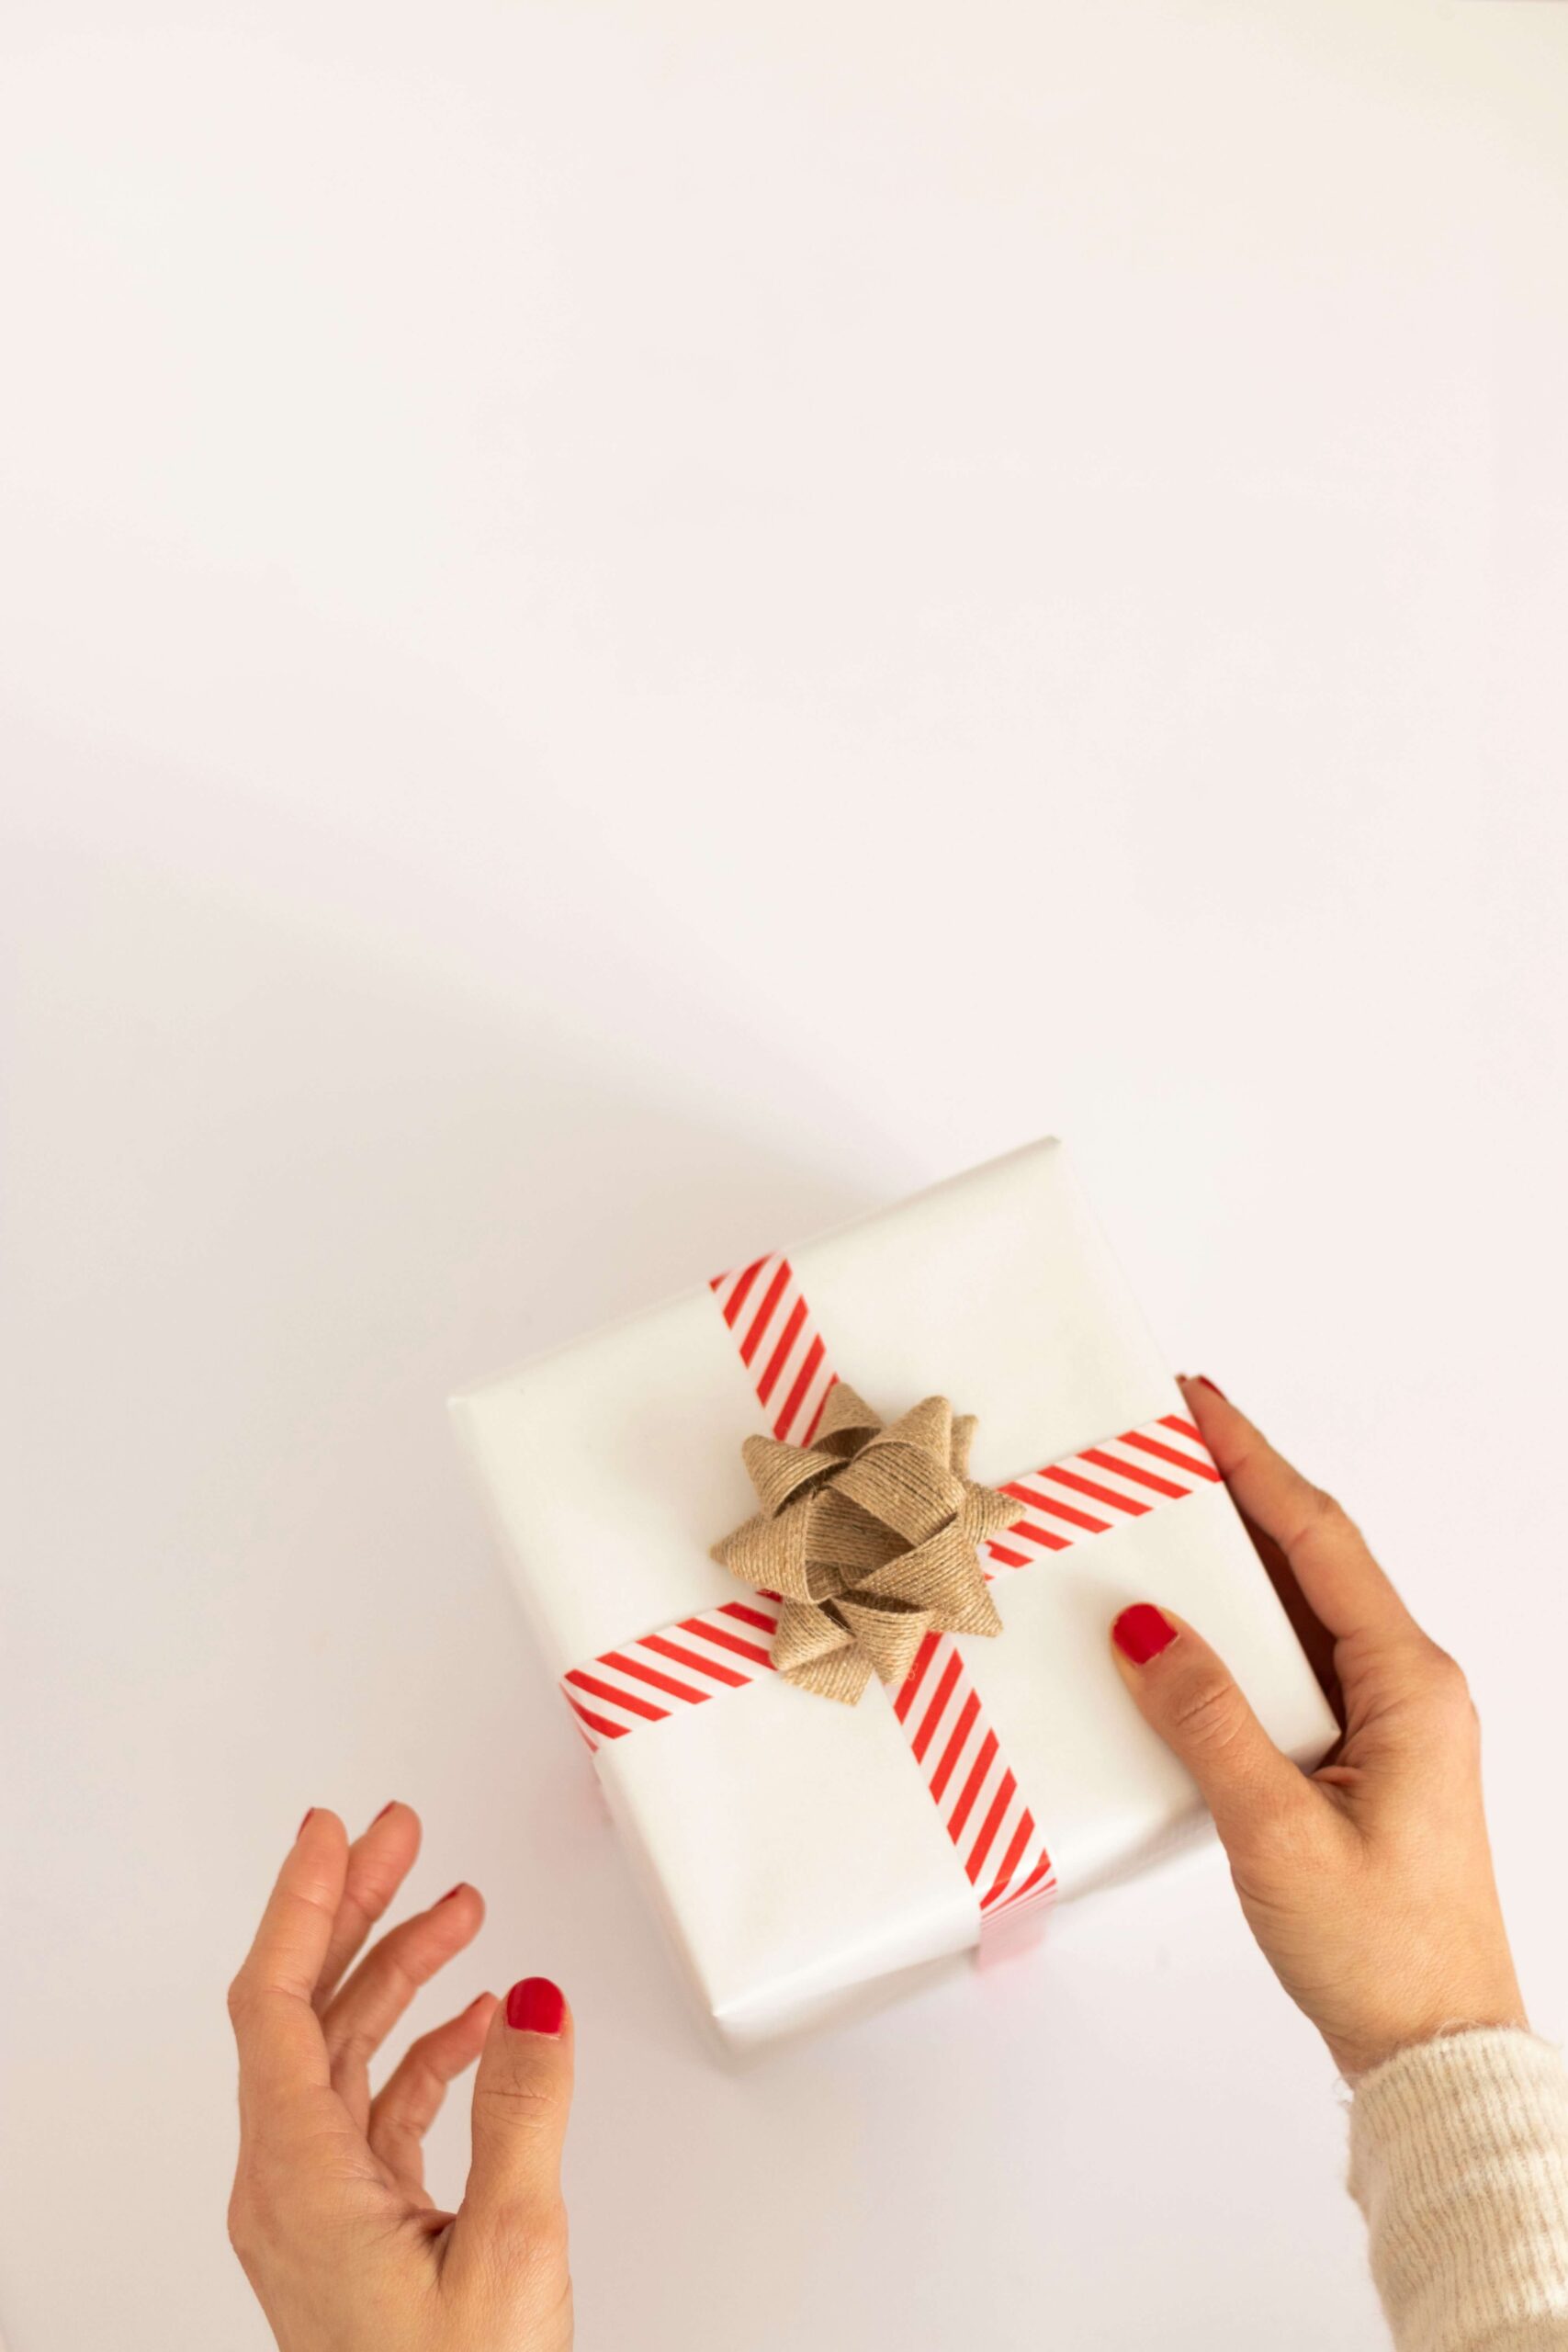 How to Reduce Holiday Spending Without Feeling Restricted: Tips From a Financial Coach